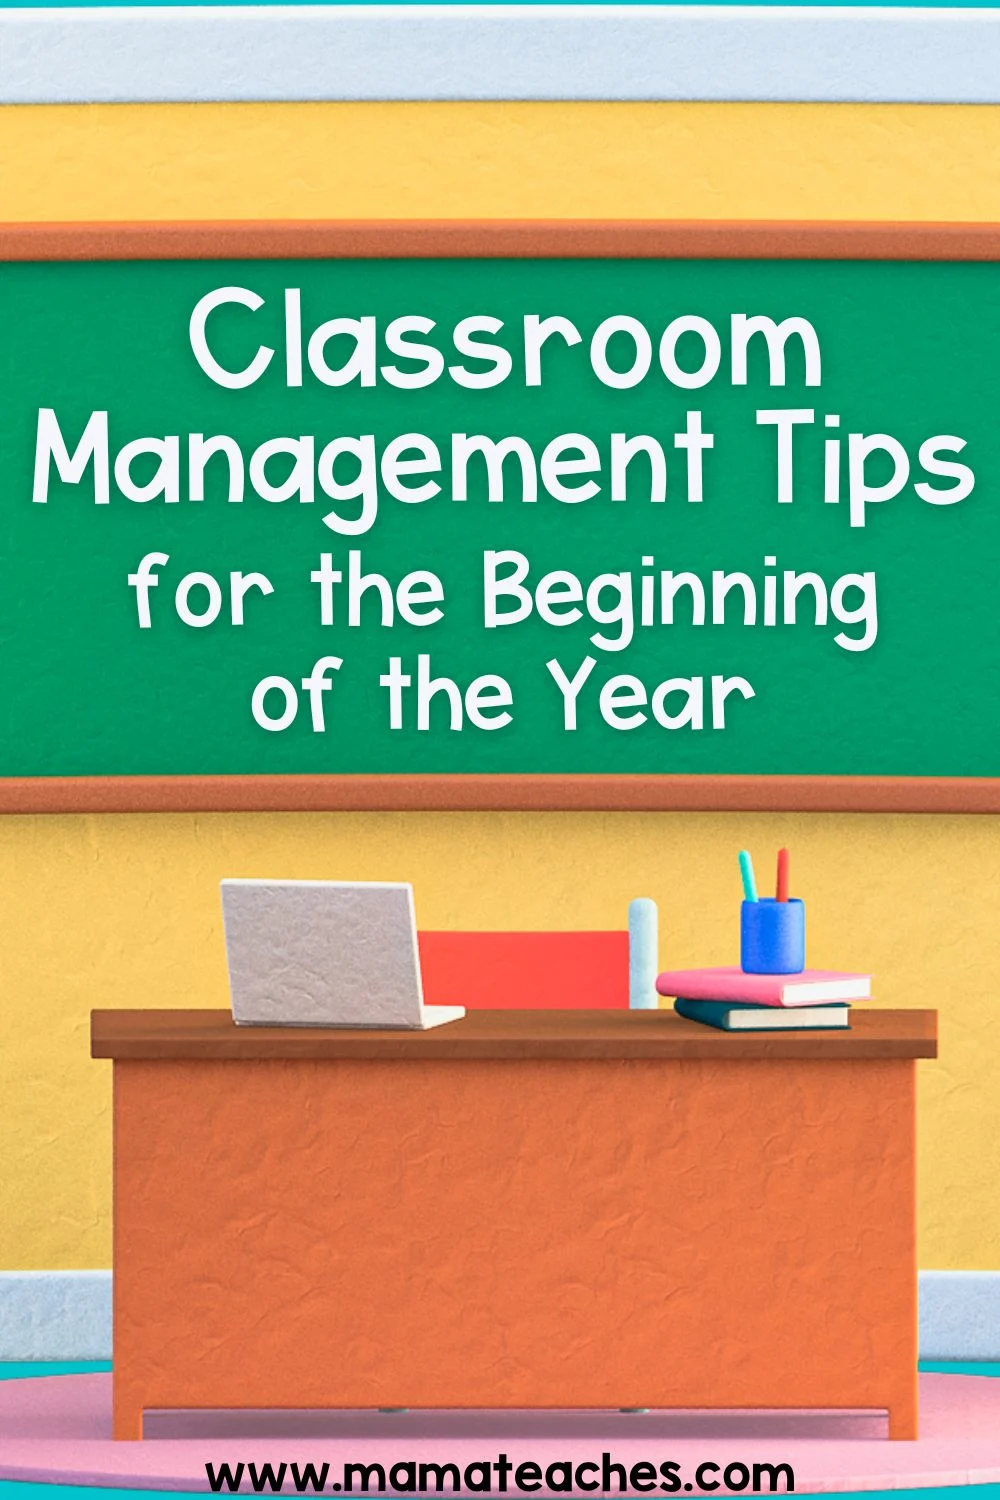 Classroom Management Tips for the Beginning of the Year